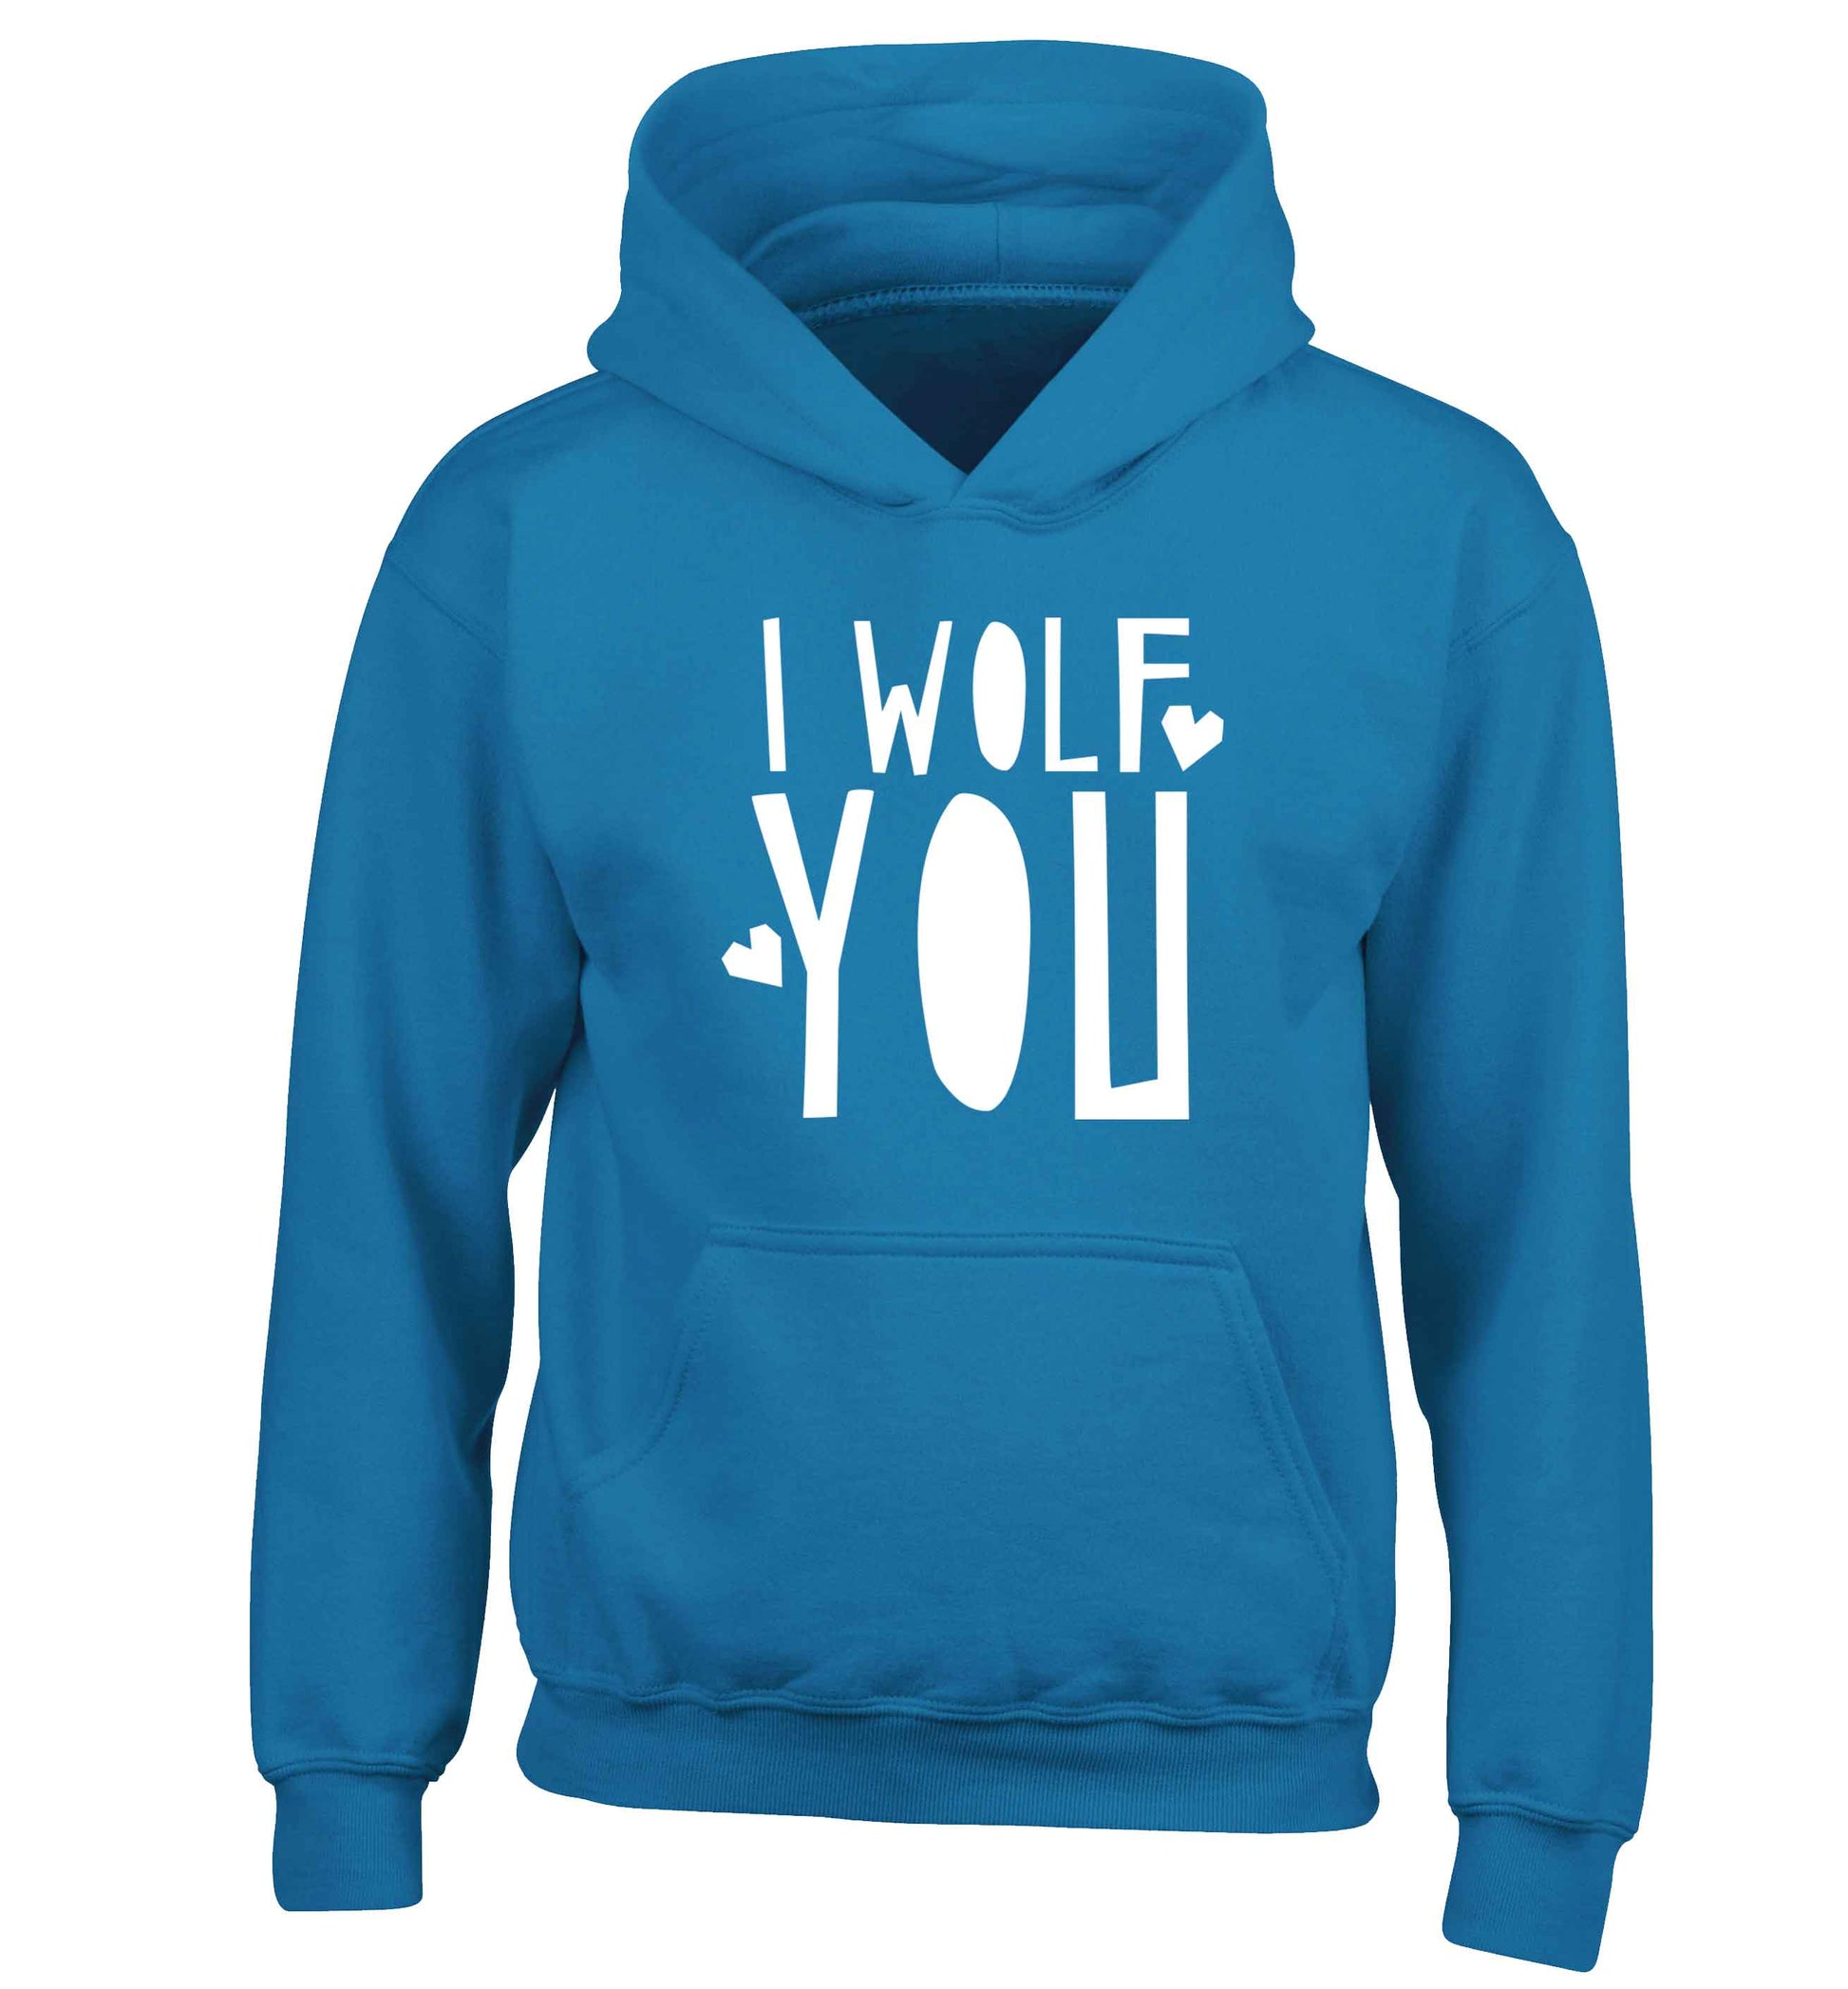 I wolf you children's blue hoodie 12-13 Years